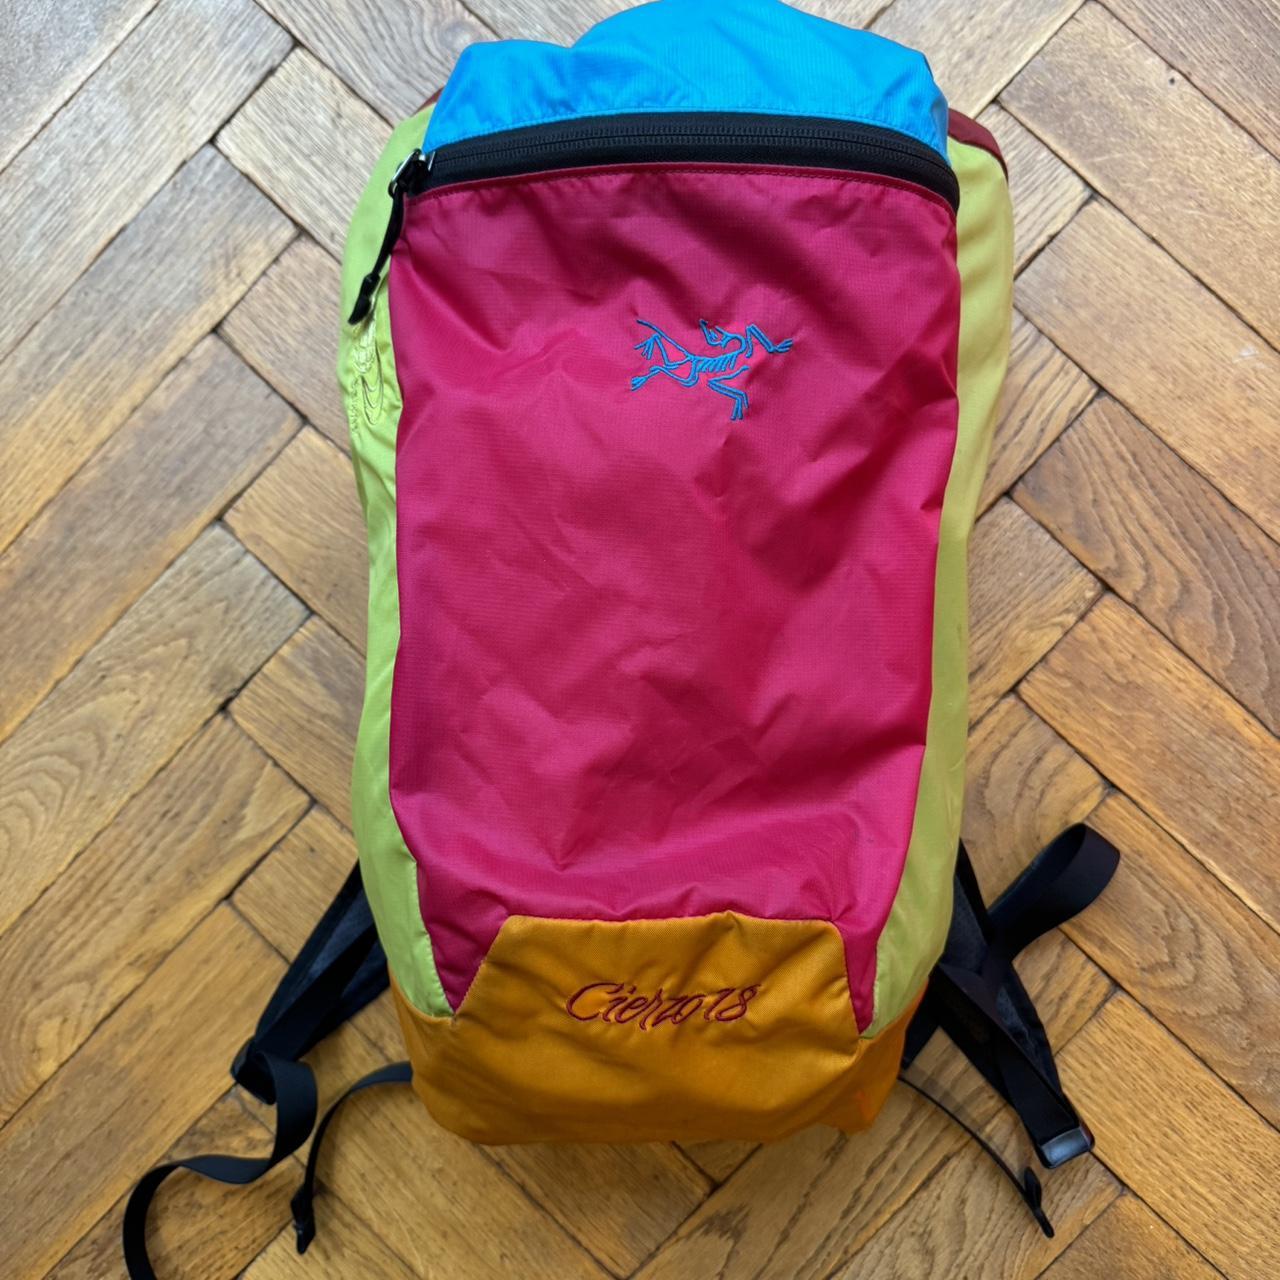 Arc’teryx x beams 18ltr day pack. Actually... - Depop